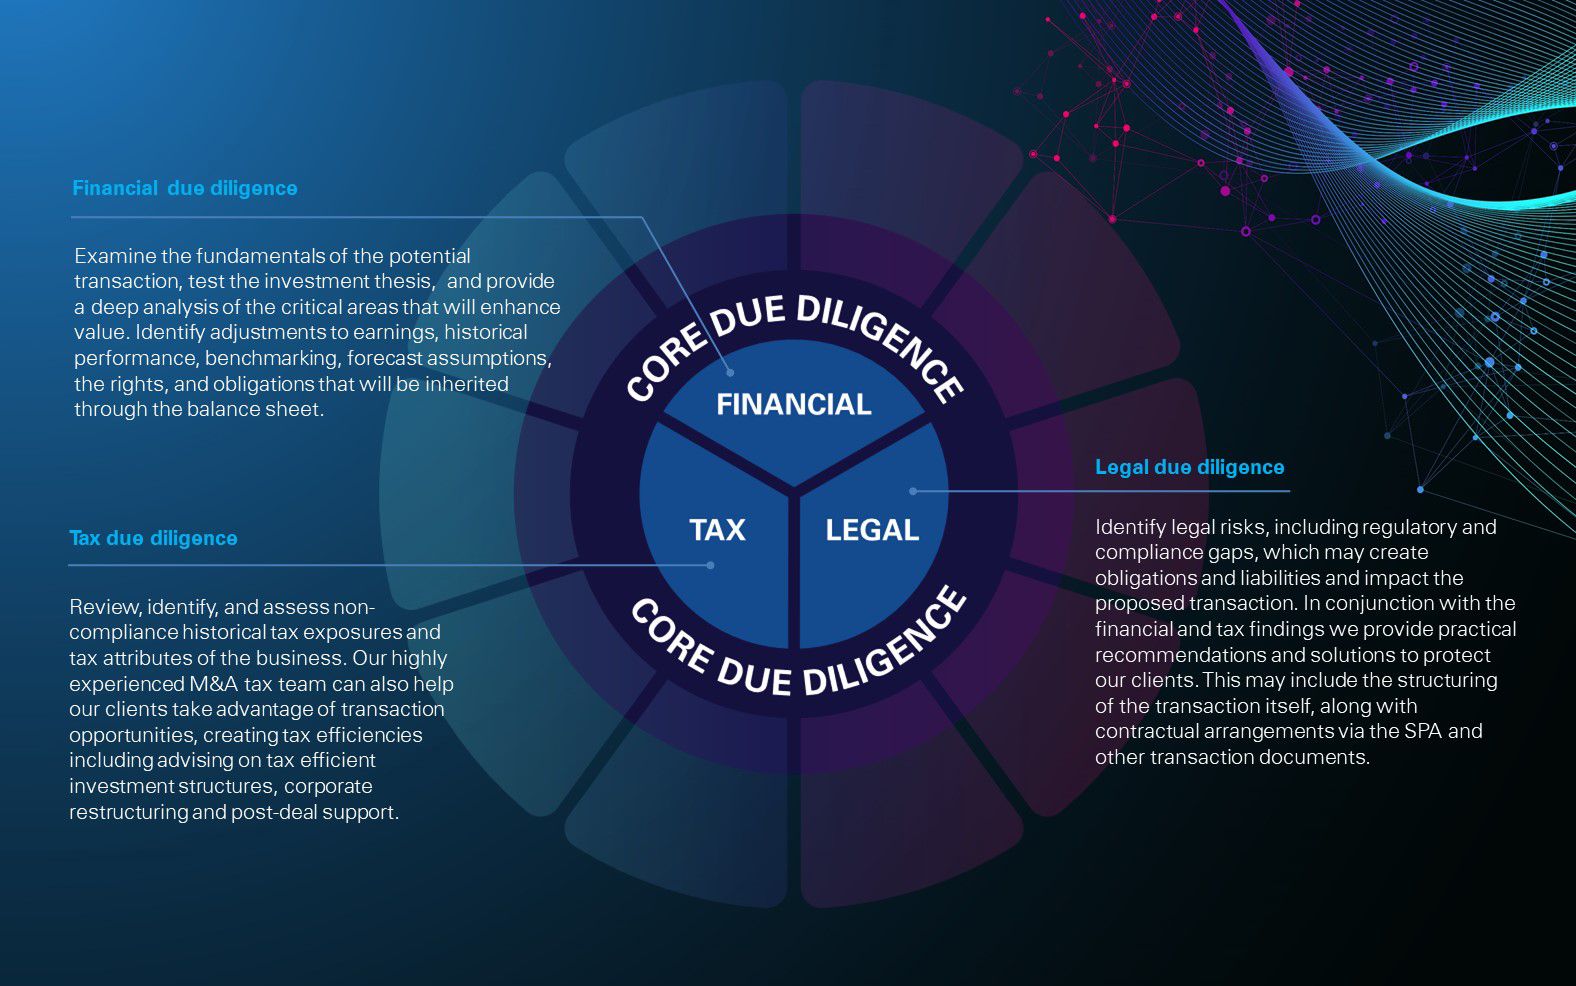 KPMG’s core Integrated Due Diligence service